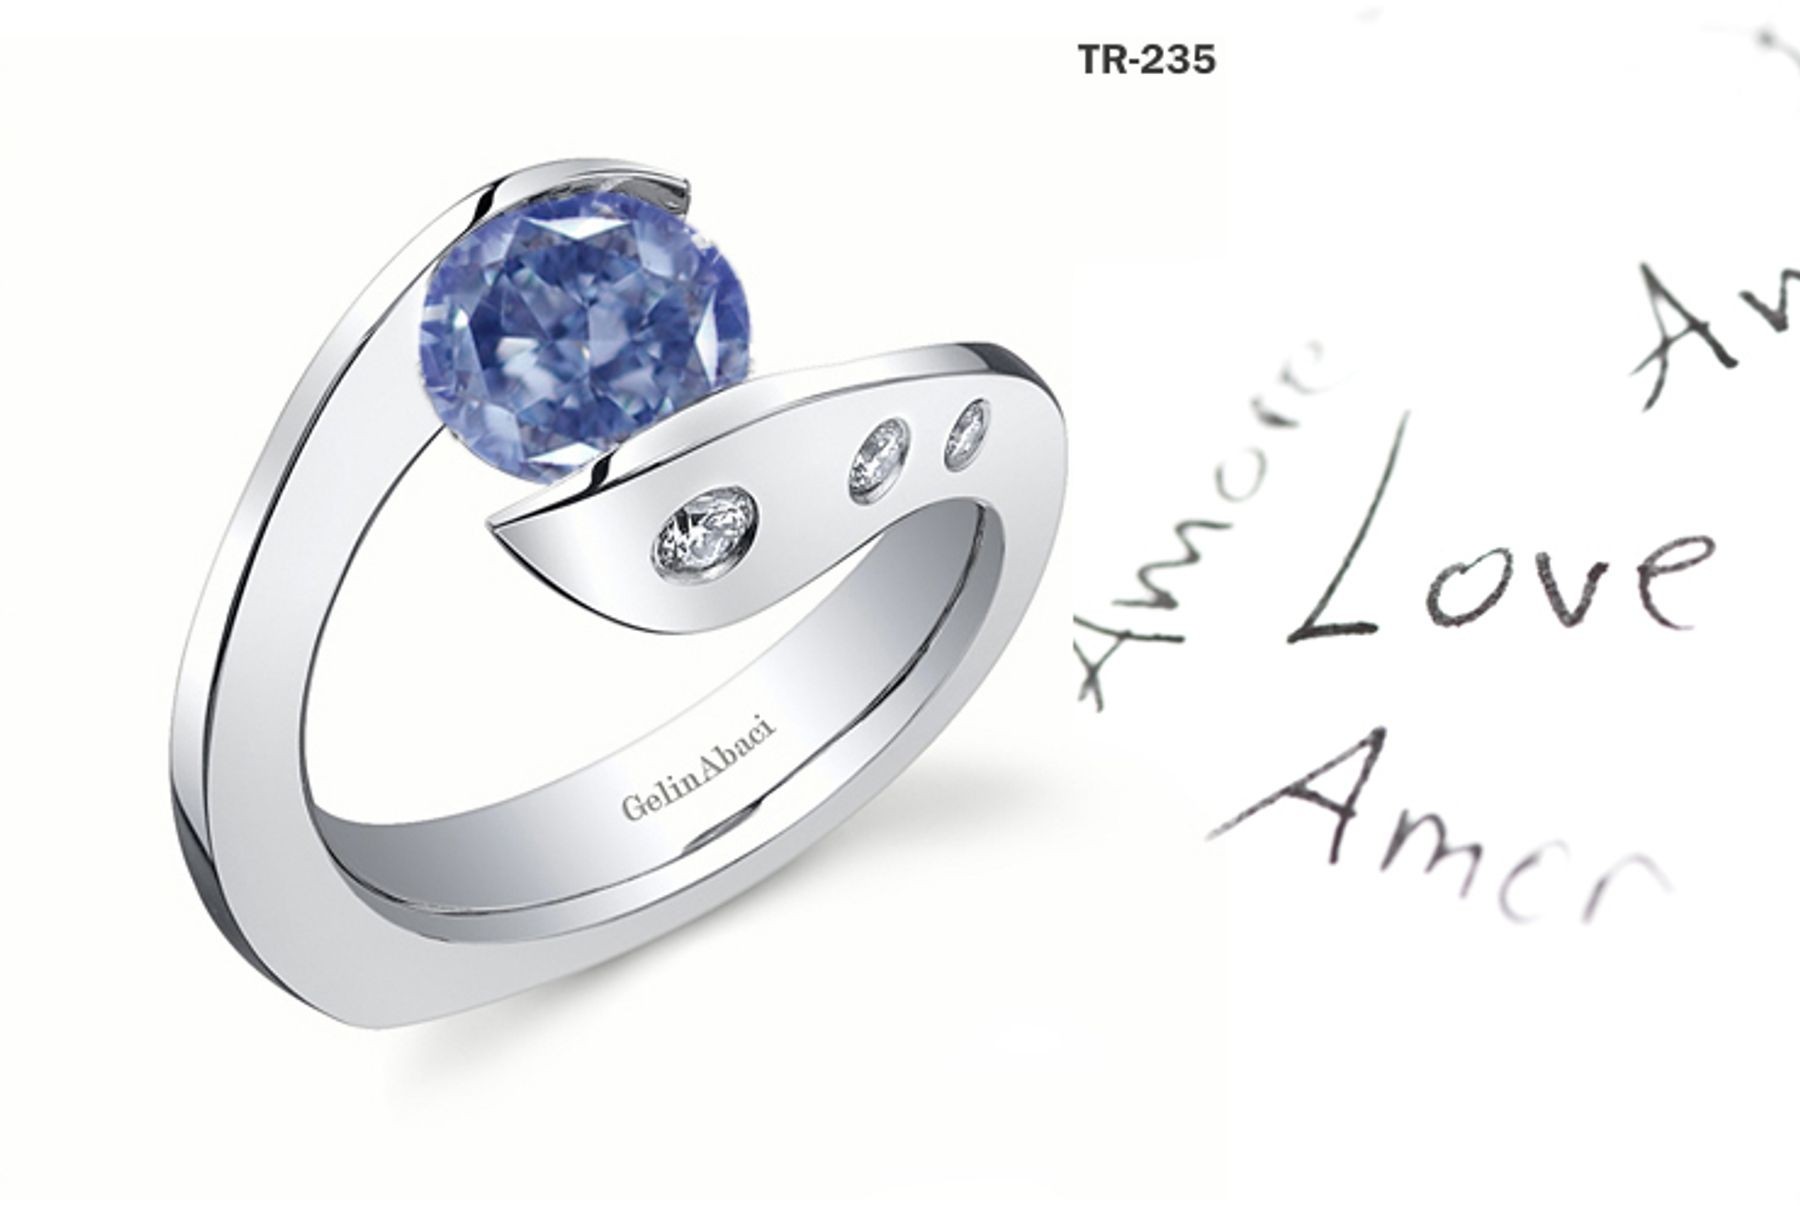 Exclusive Design Tension Set Jewelry: Tension Set Blue Diamond Rings